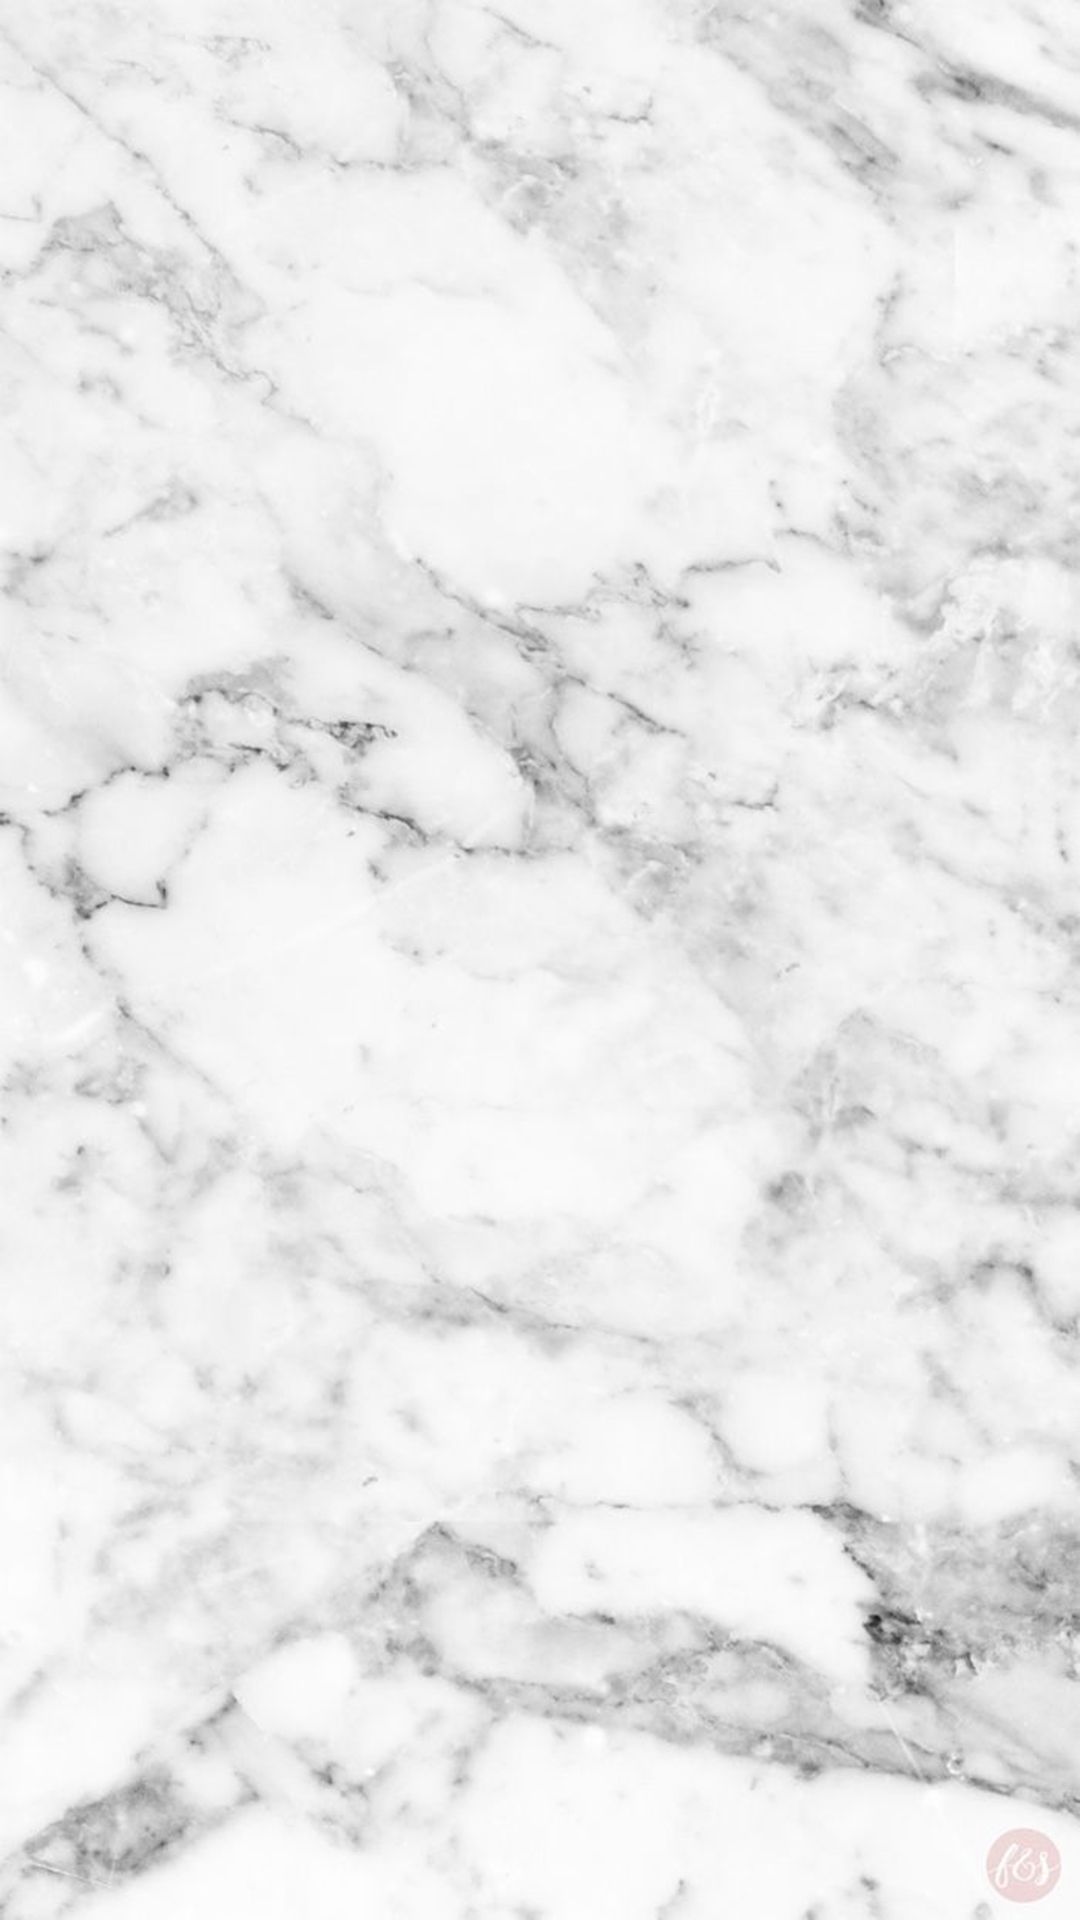 Aesthetic Marble iPhone Wallpaper Free Download